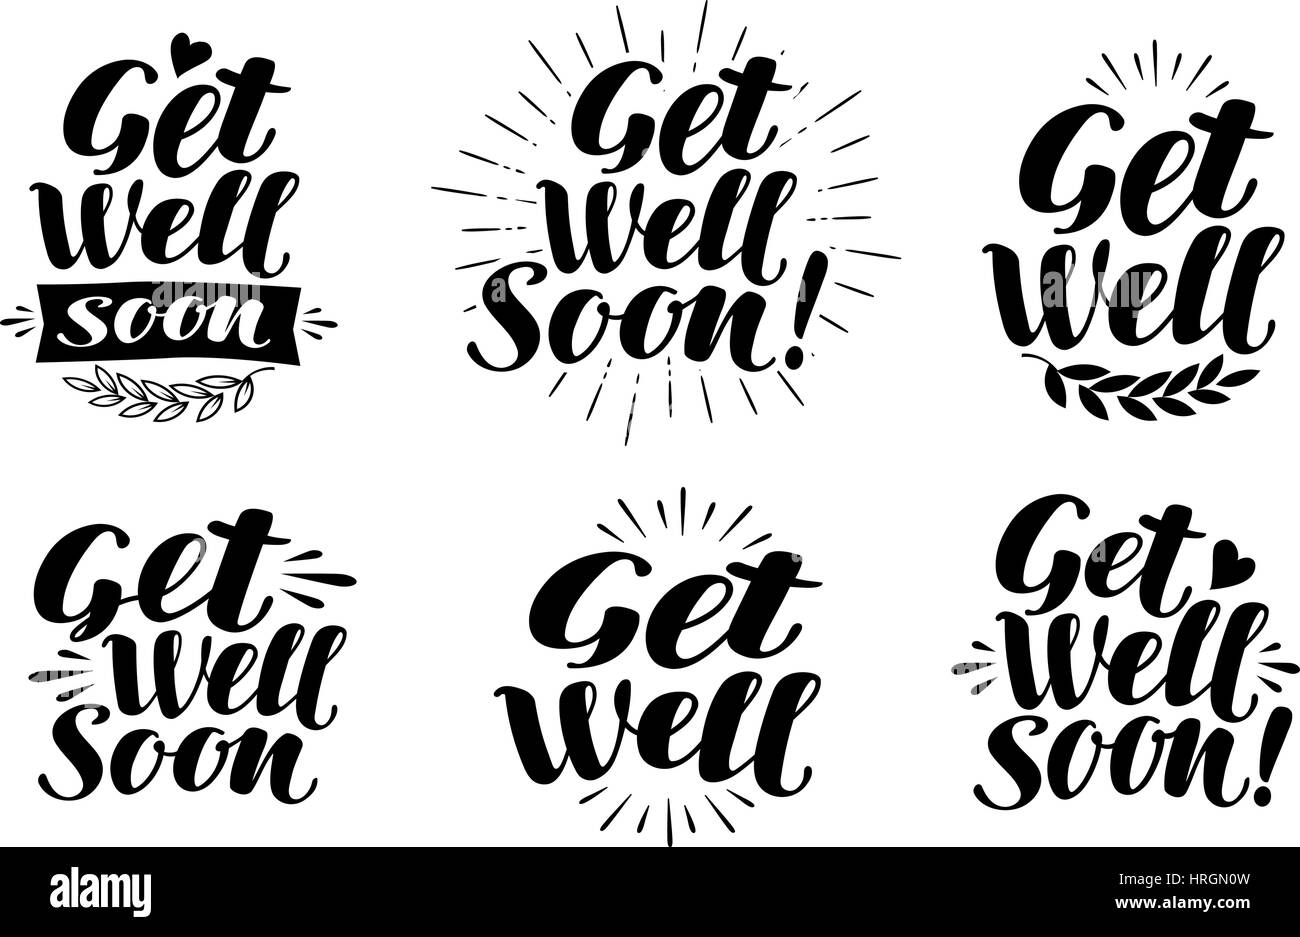 Get well soon Stock Vector Images - Alamy